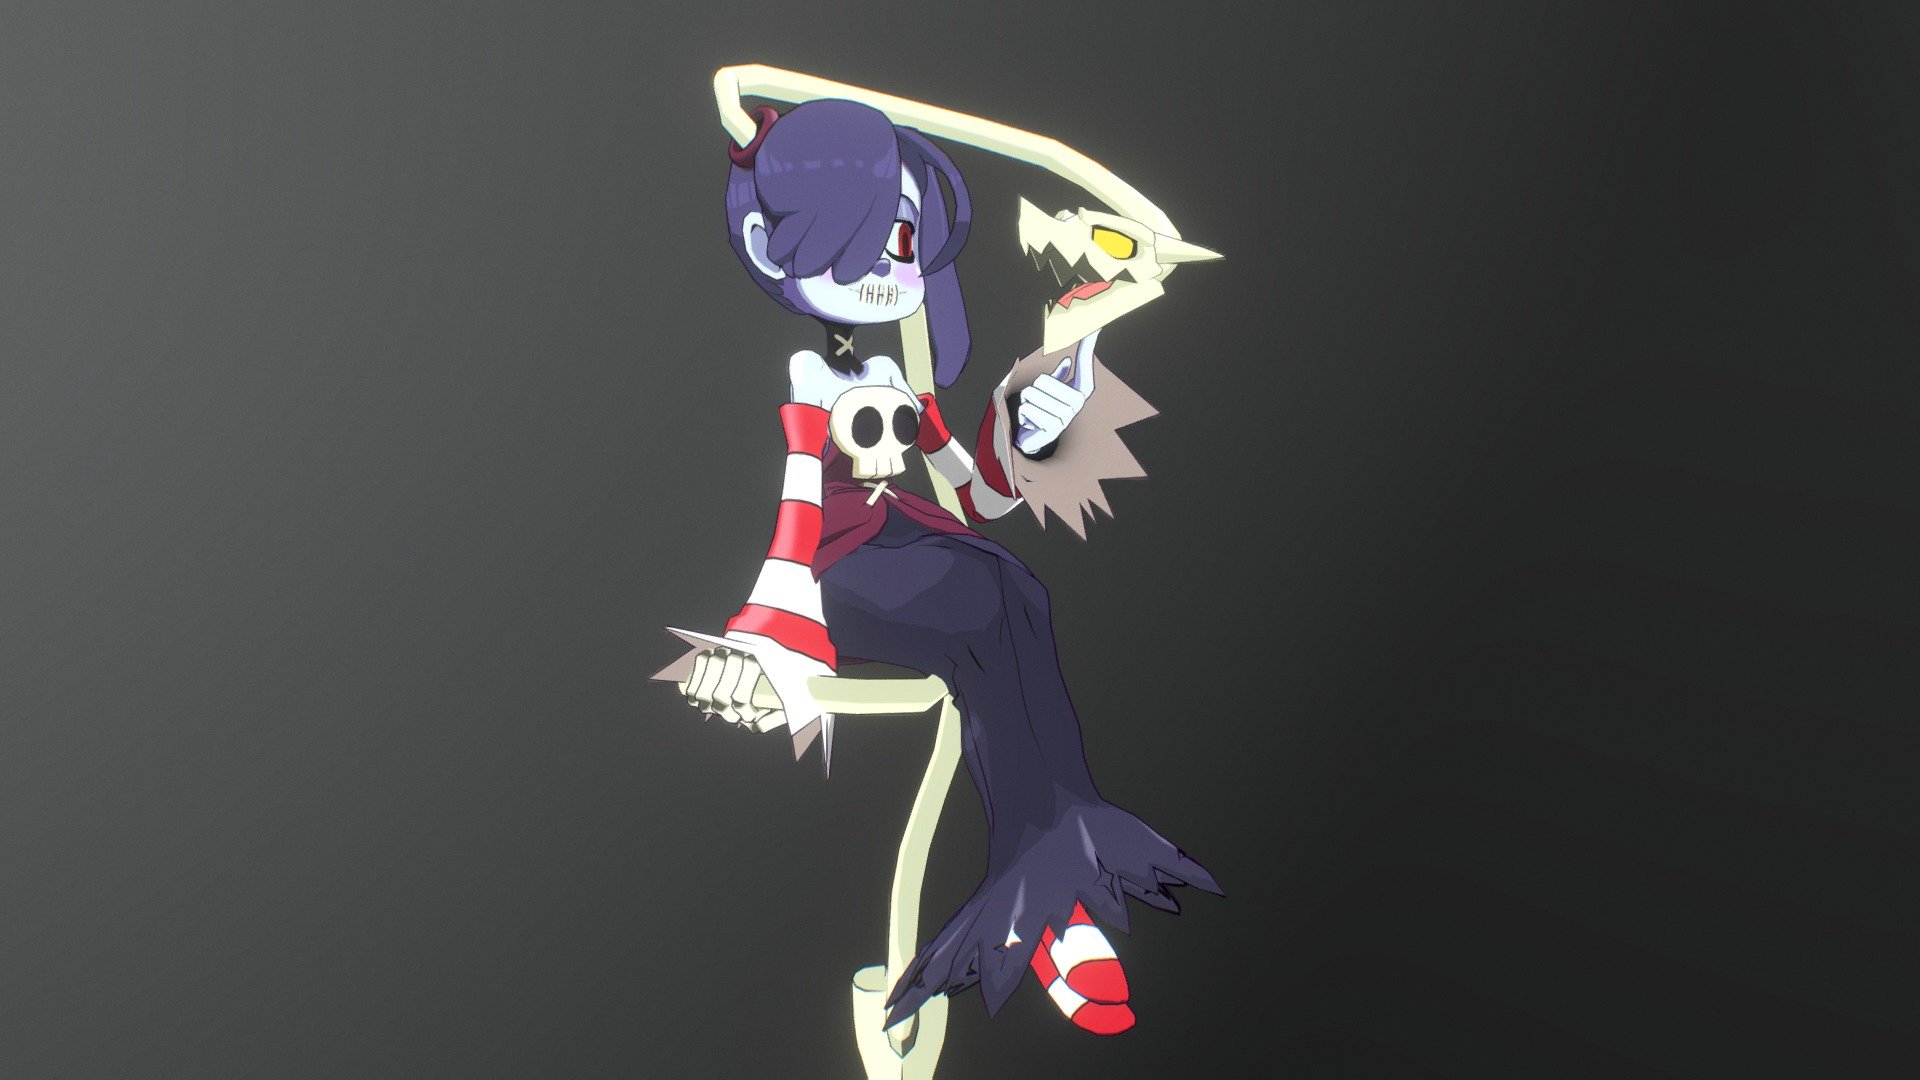 Sienna Contiello, more commonly known as Squigly, is an undead girl, kept sentient thanks to her family's Parasite, Leviathan.

Commissioned by MrR0k0, @SoloRok0 on twitter

Squigly belongs from Skullgirls game by Autumn Games 3d model